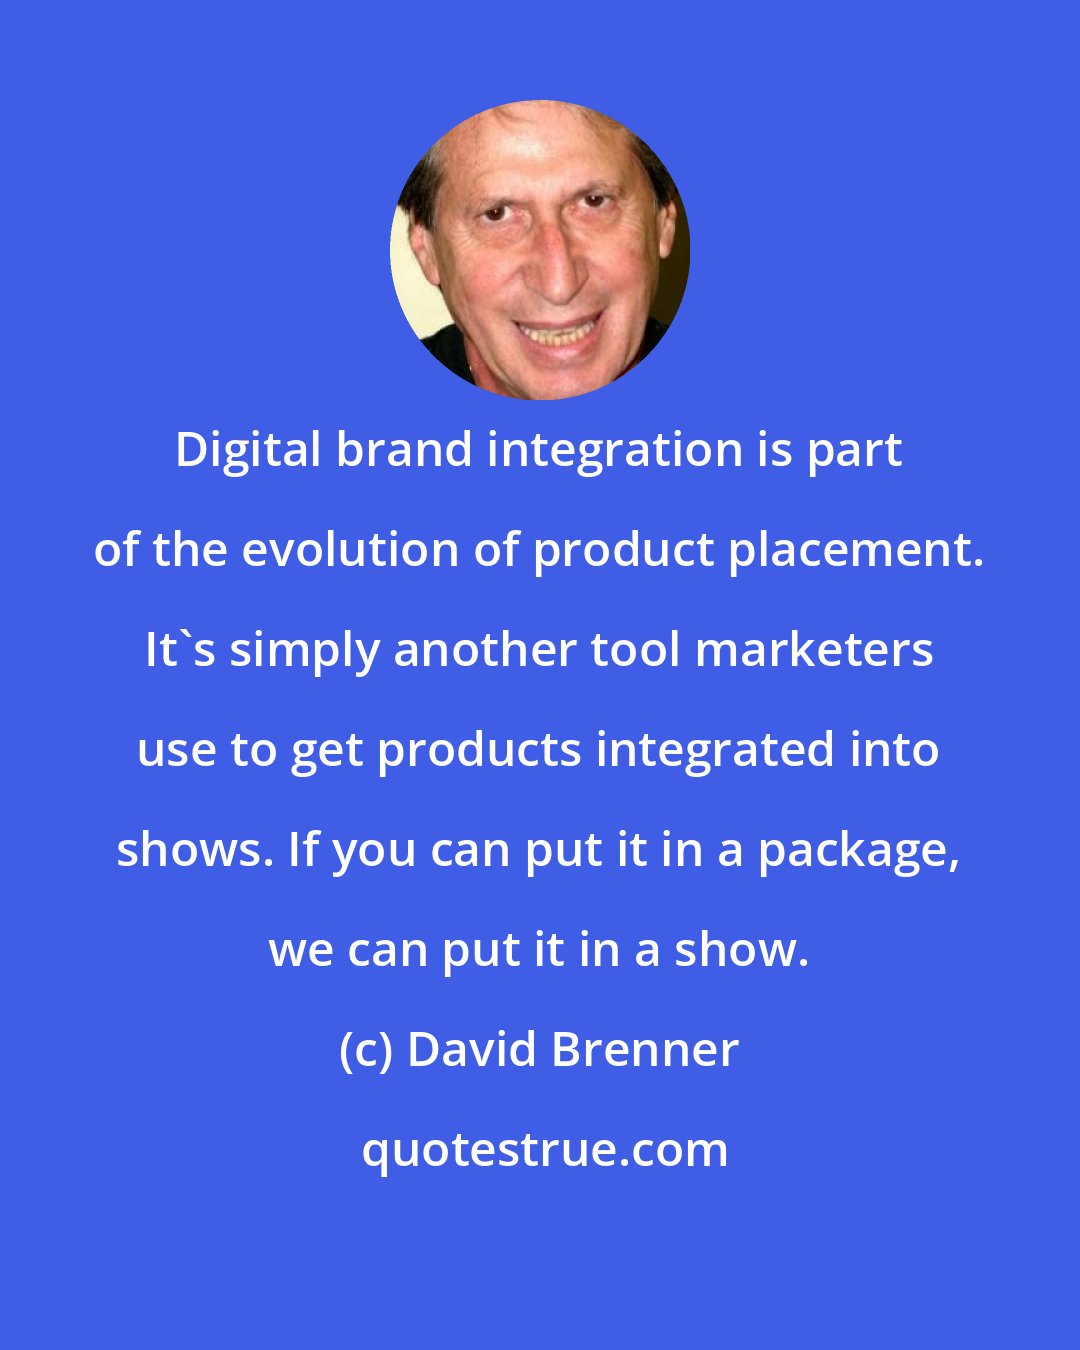 David Brenner: Digital brand integration is part of the evolution of product placement. It's simply another tool marketers use to get products integrated into shows. If you can put it in a package, we can put it in a show.